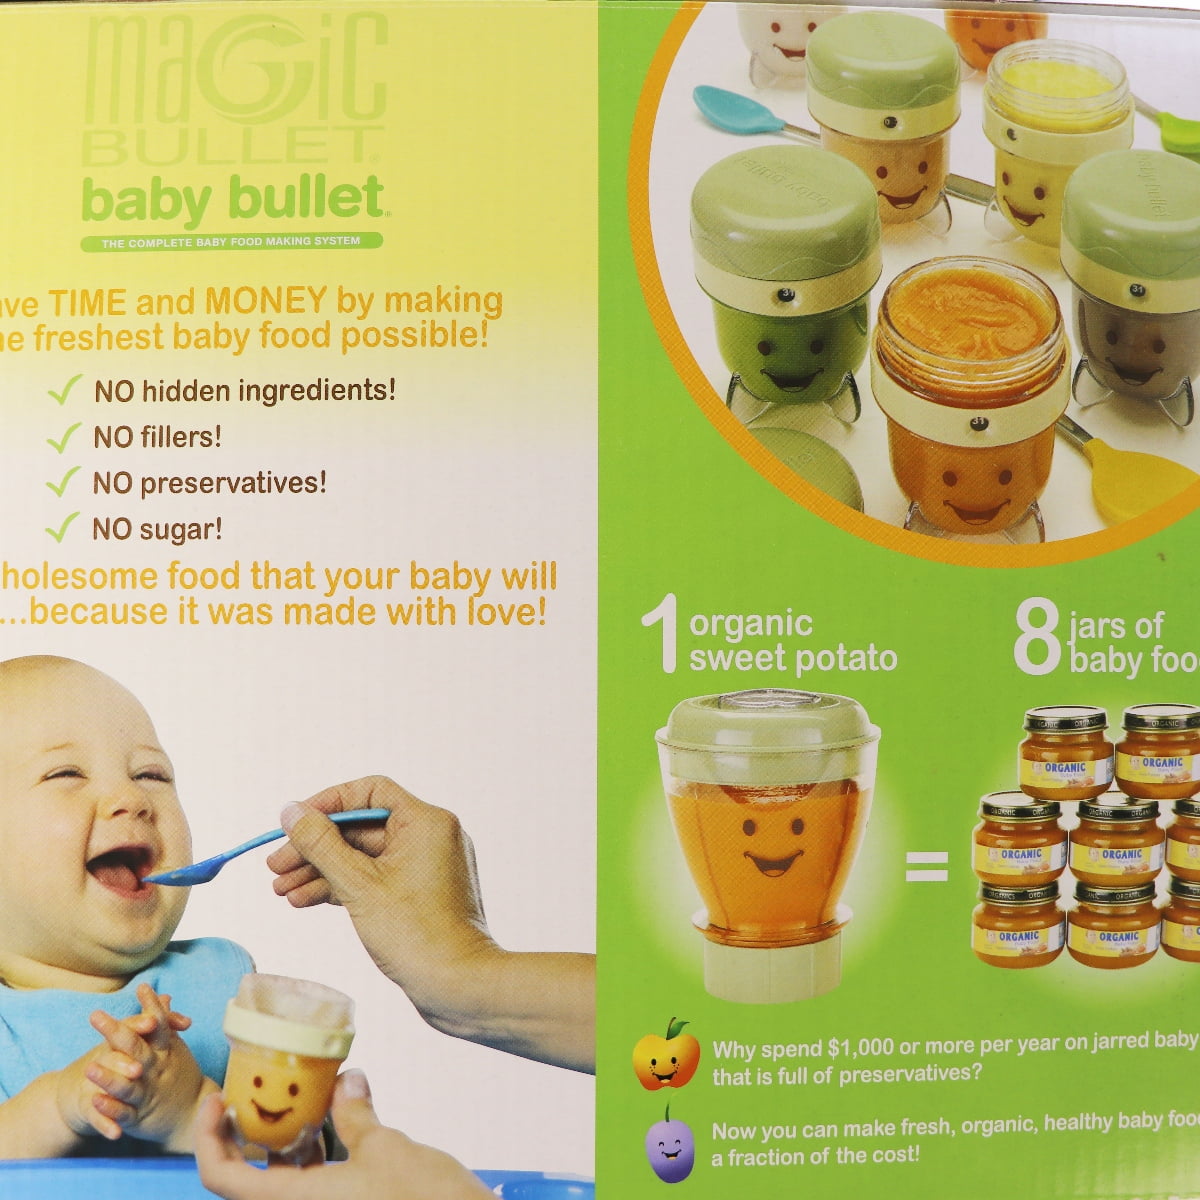 $5 Savings Magic Bullet Baby Bullet Baby Food Maker, 20-Piece Set, with  Free $5 e-Gift Card 